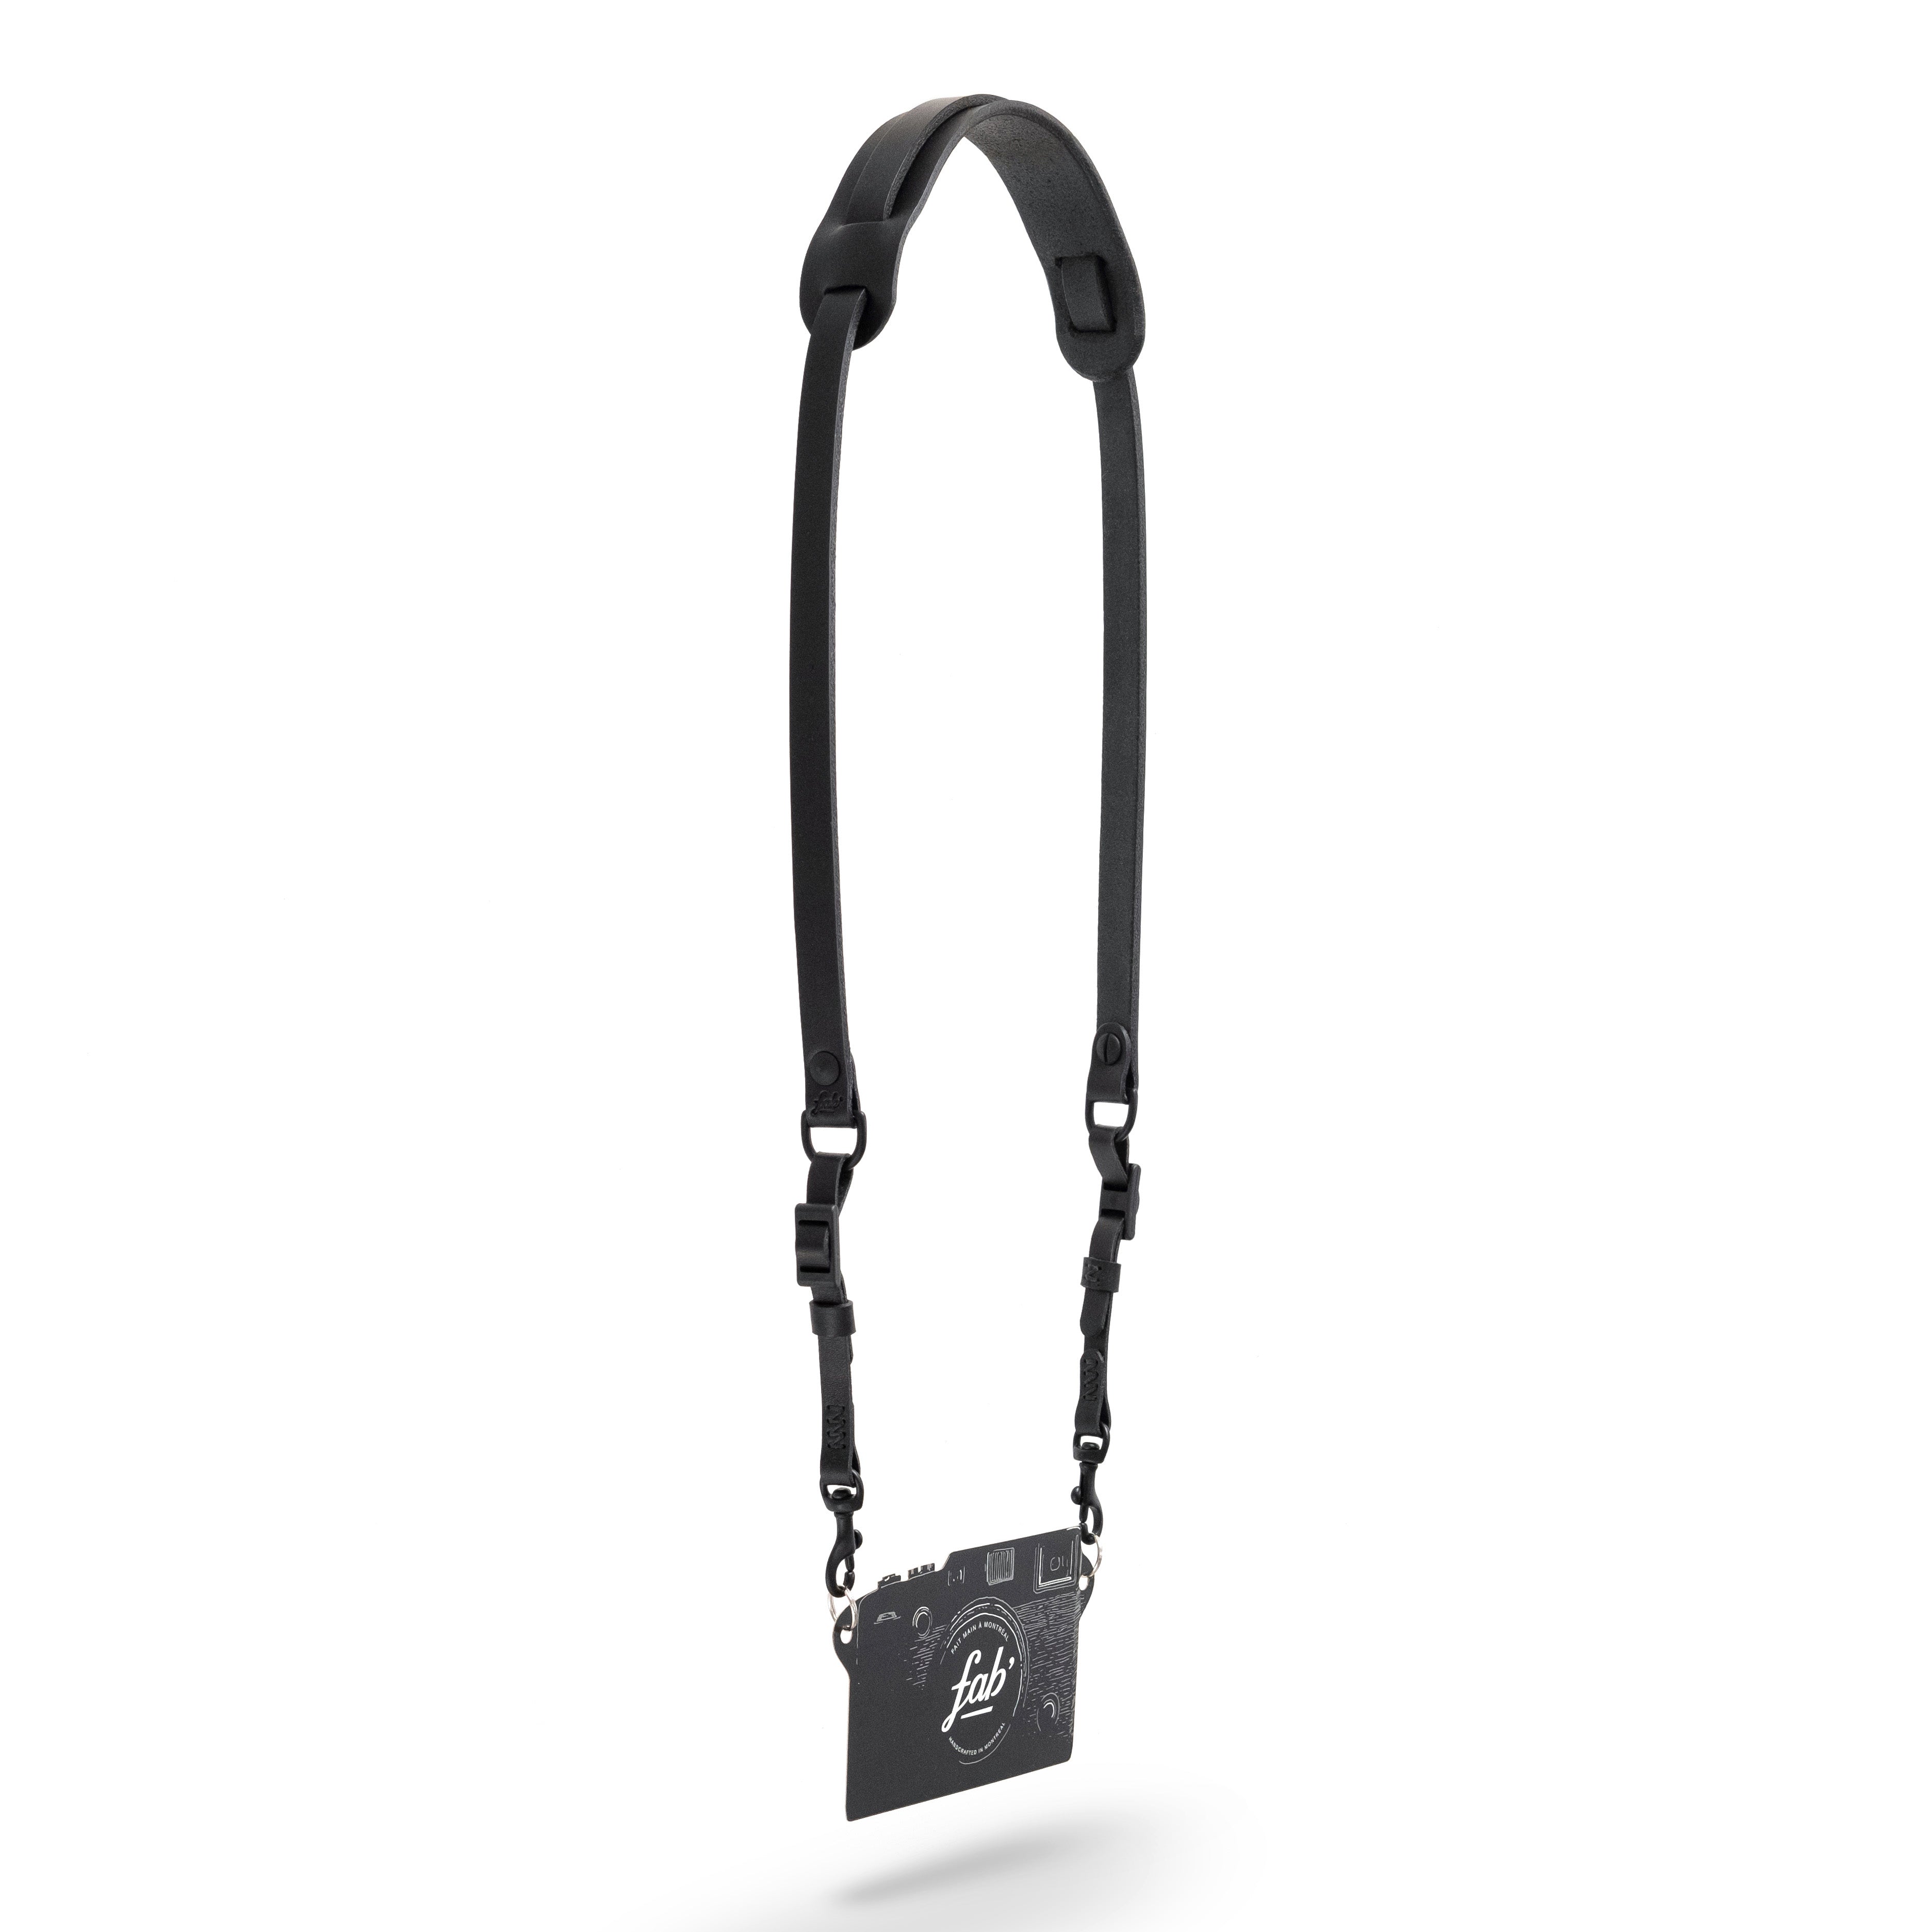 Fab' F11 strap - Black leather - Size S (39")